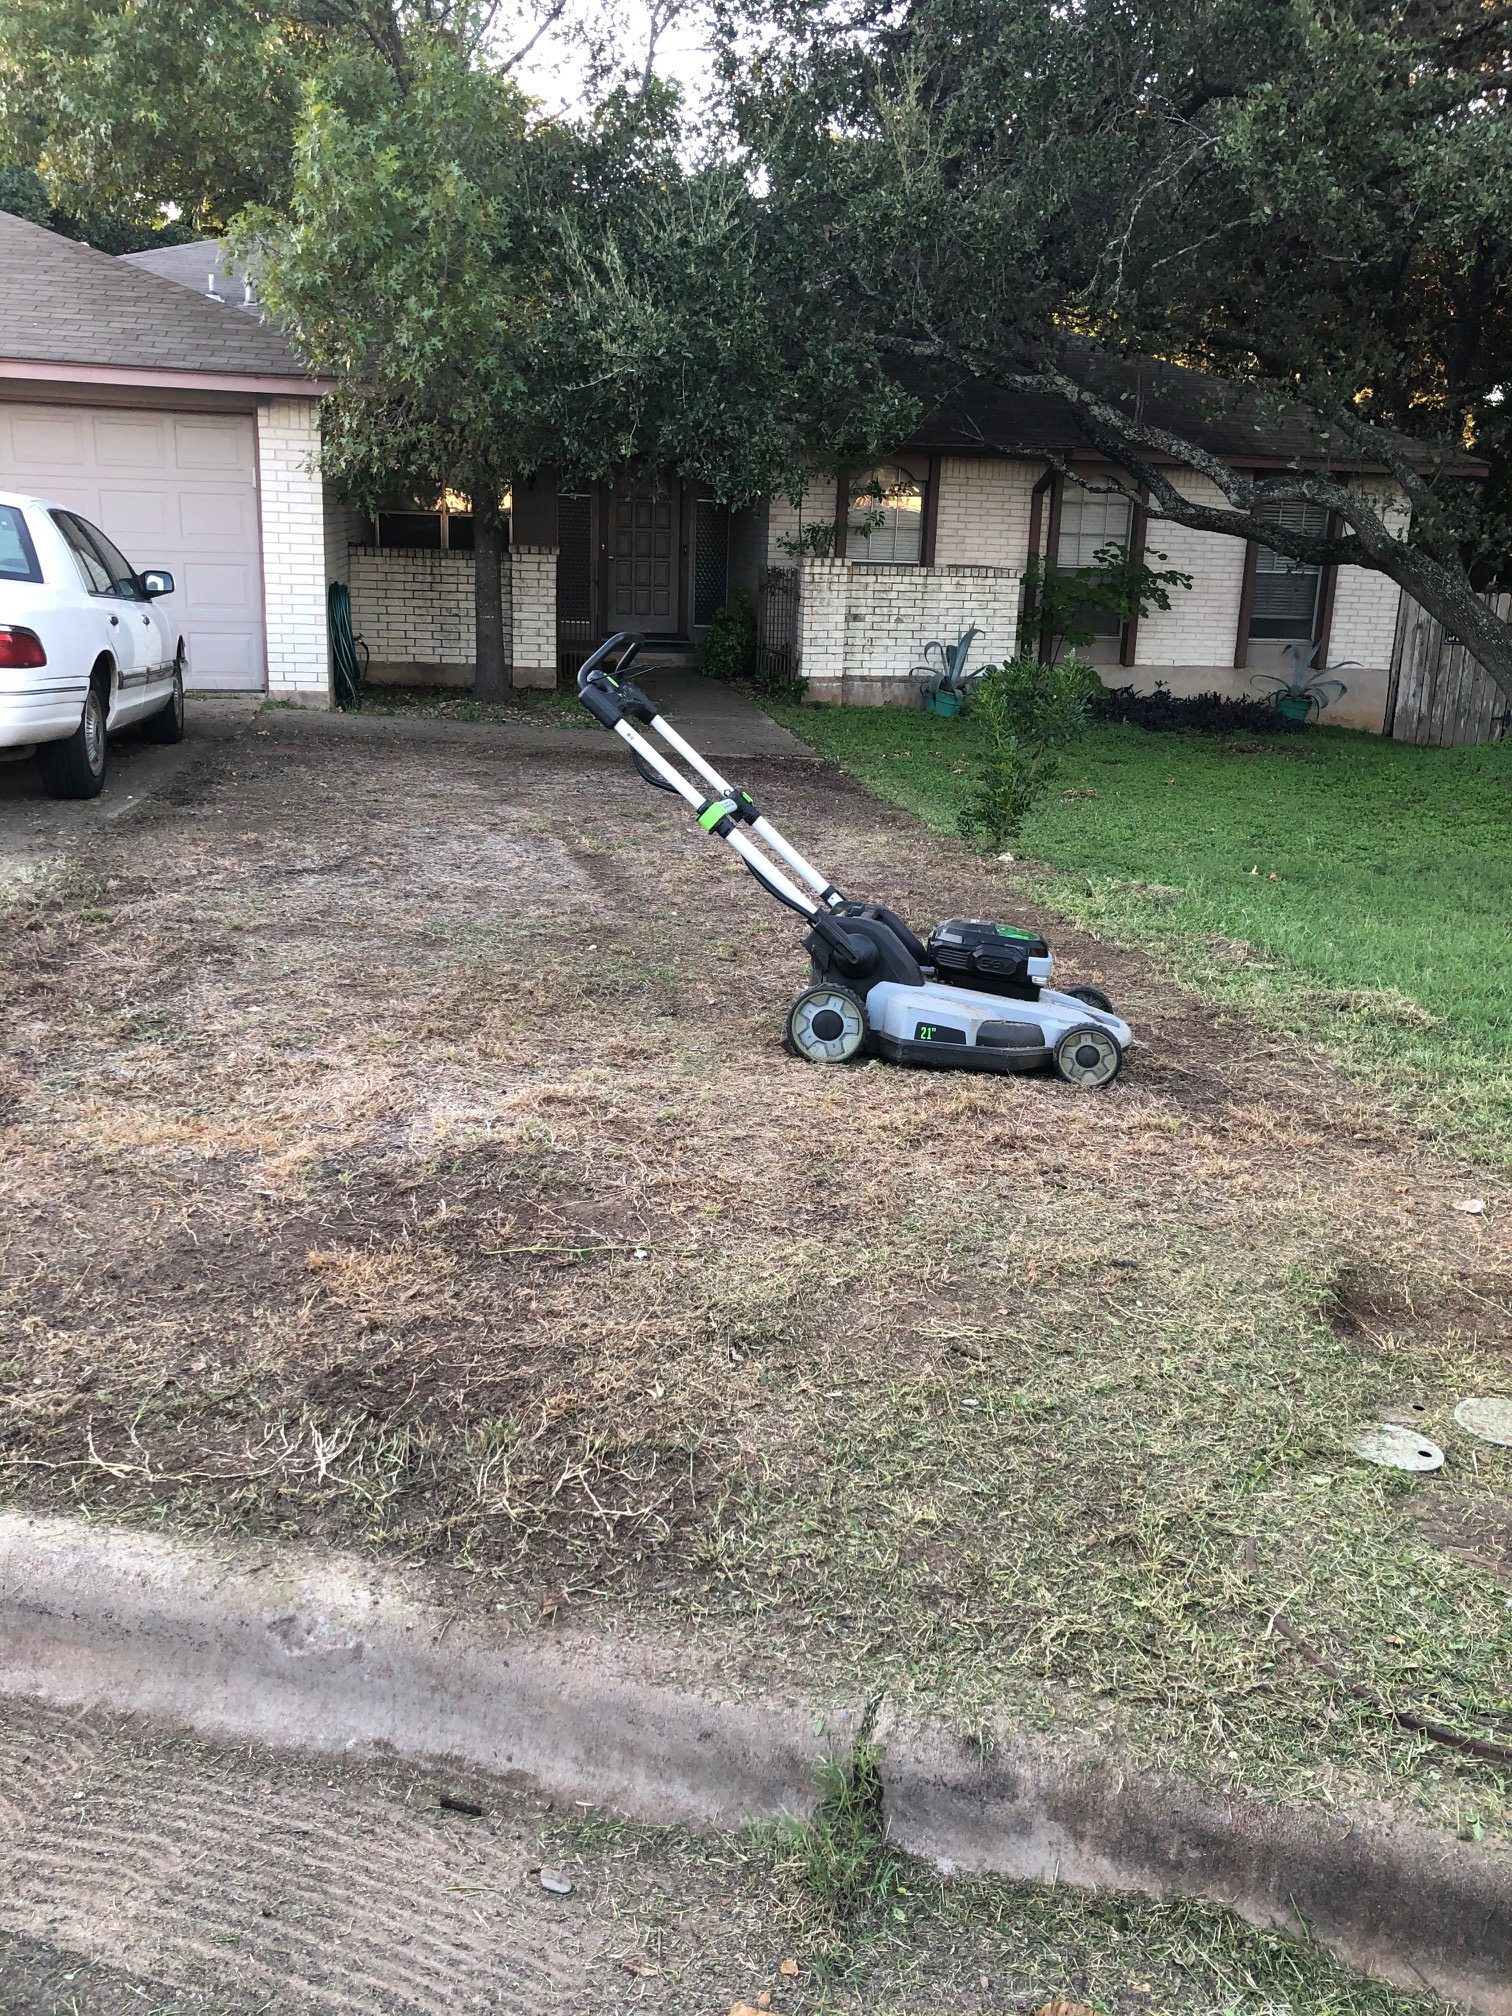 the first step was to mow the lawn as short as possible.